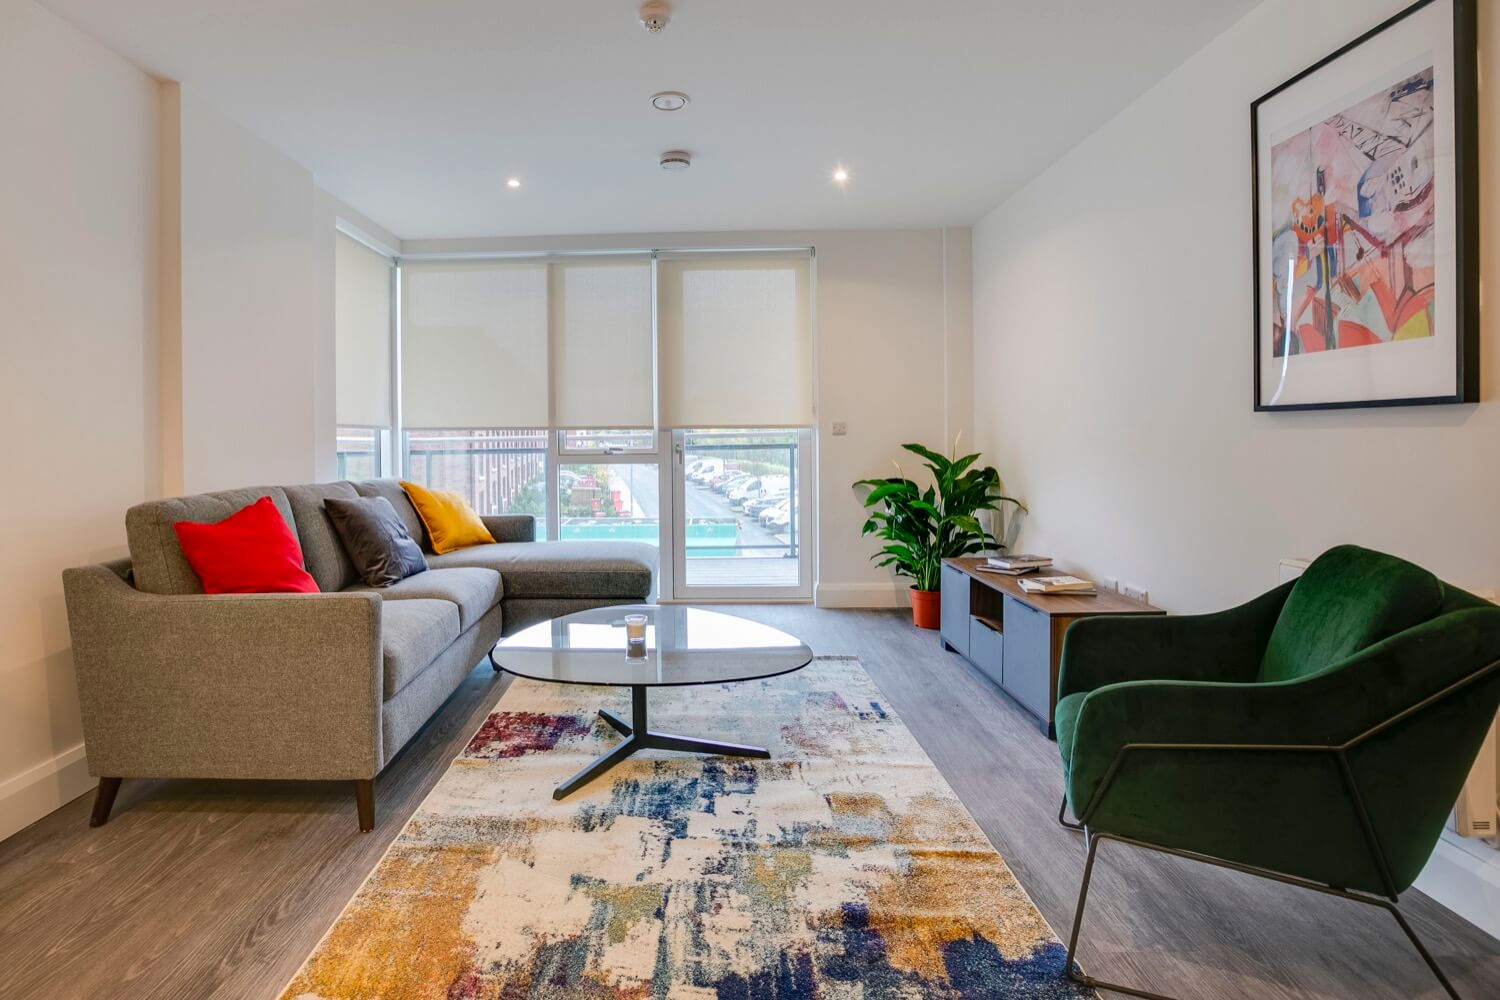 Agnes Gray Estresante Sustancial Vesta | Rent stylish 1, 2 or 3 bed homes in the heart of Dublin at the tap  of a button.